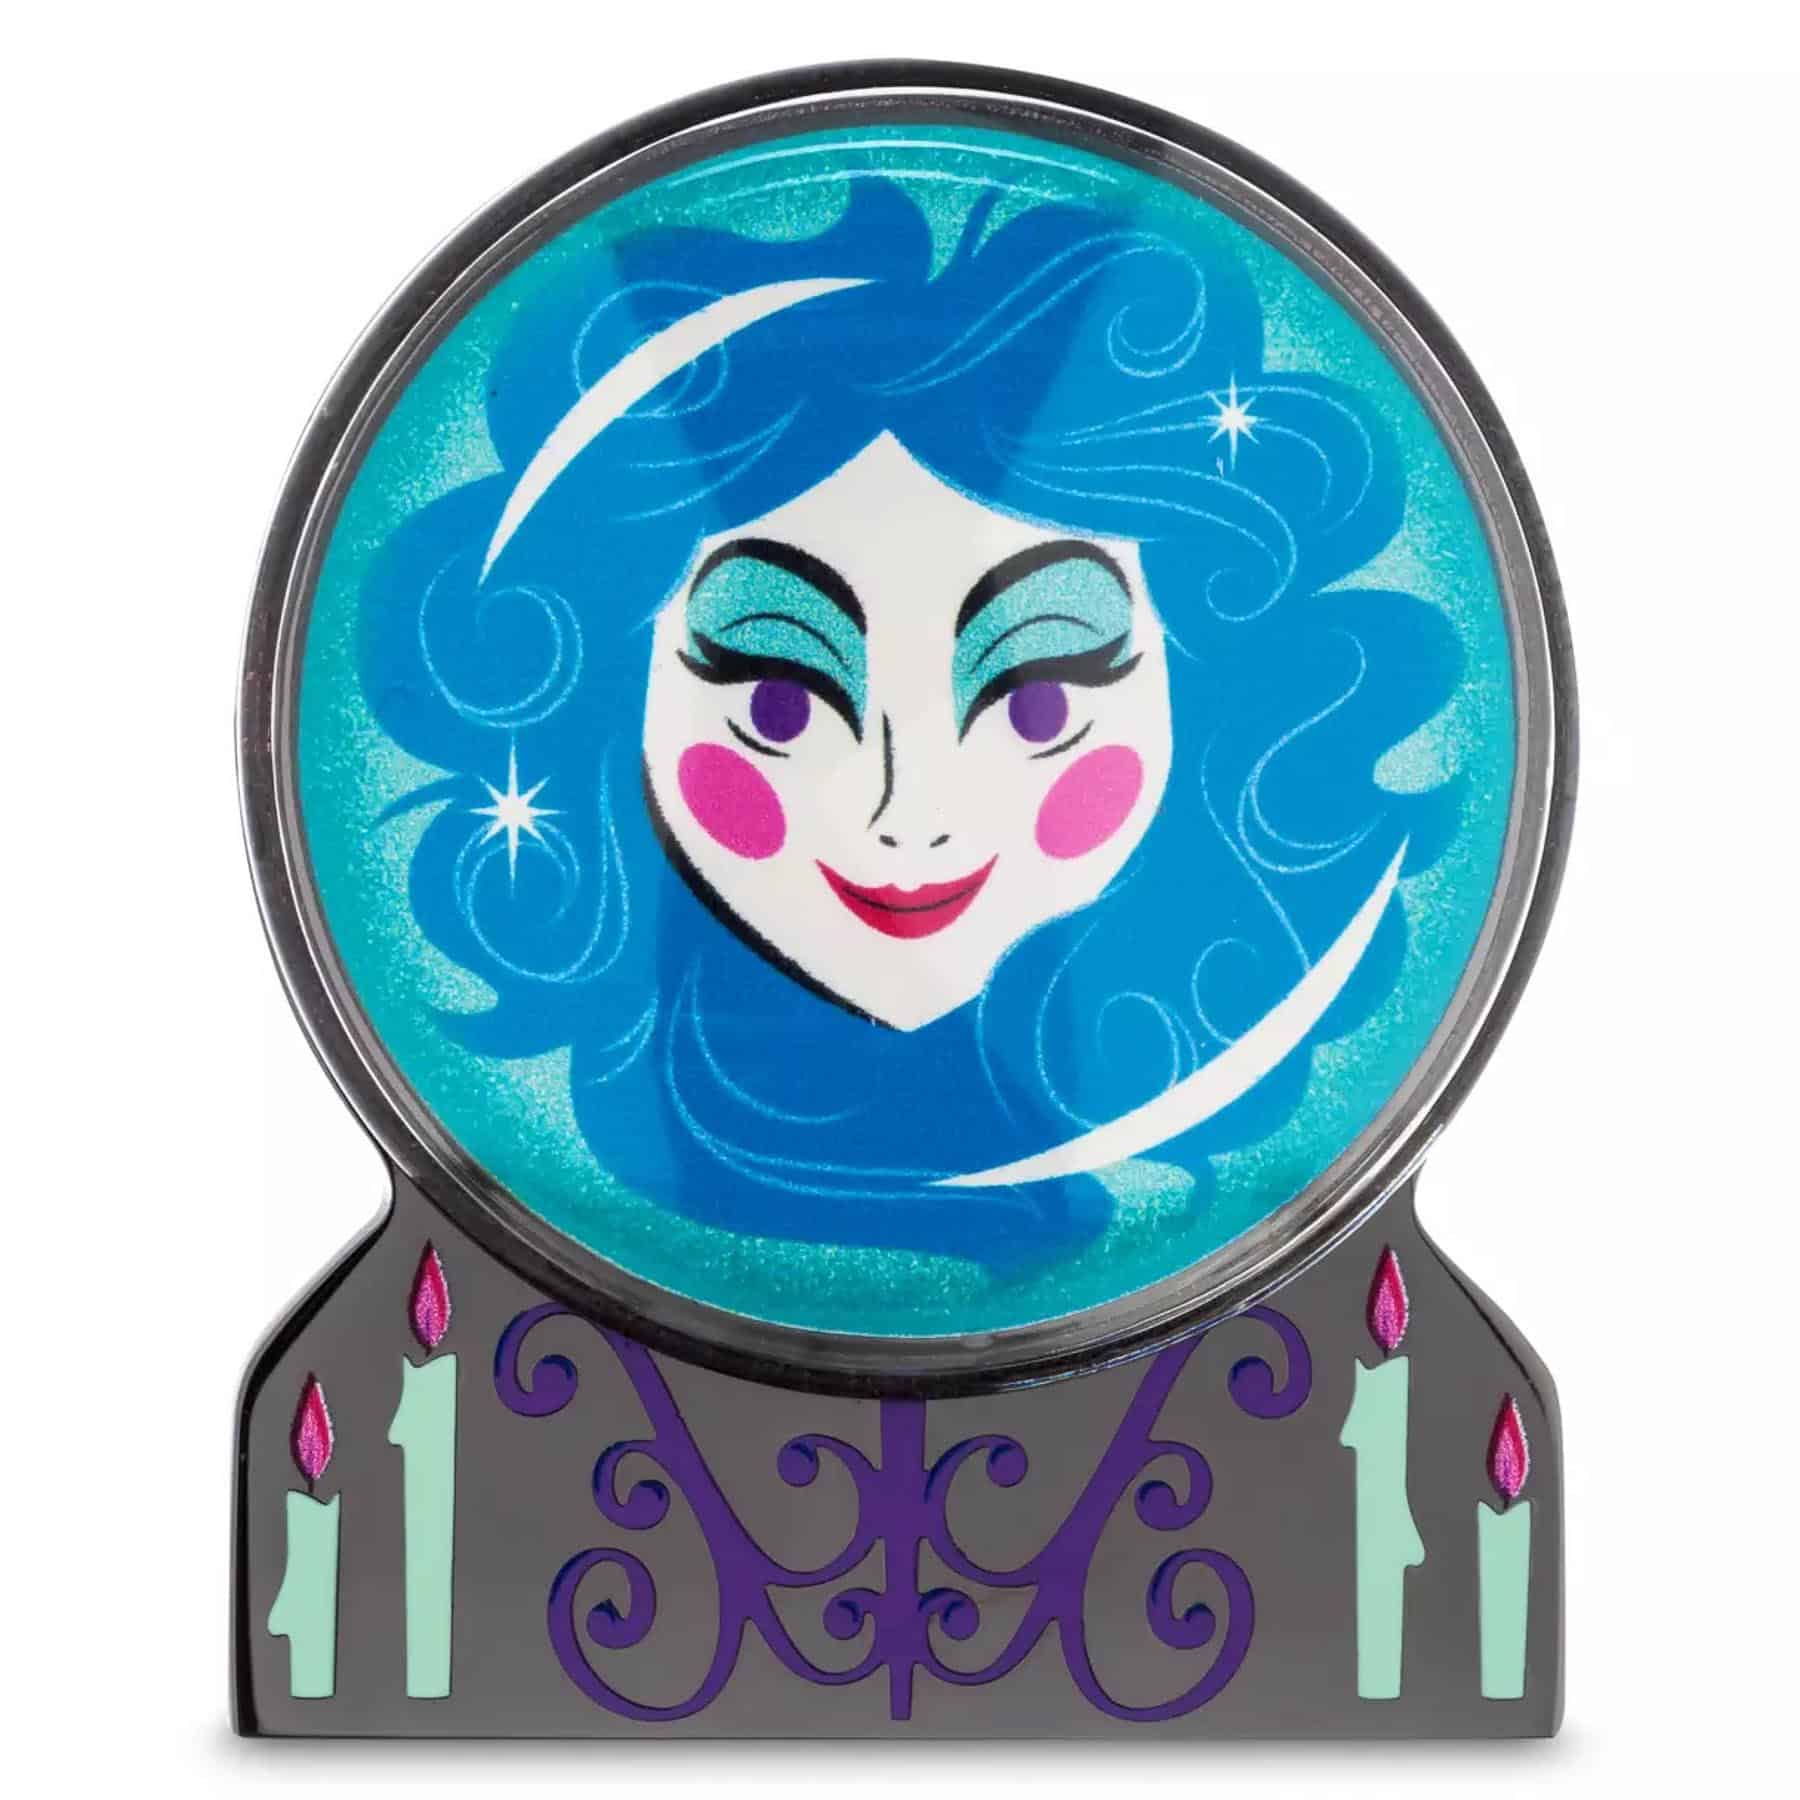 Pin featuring Madame Leota from the Haunted Mansion